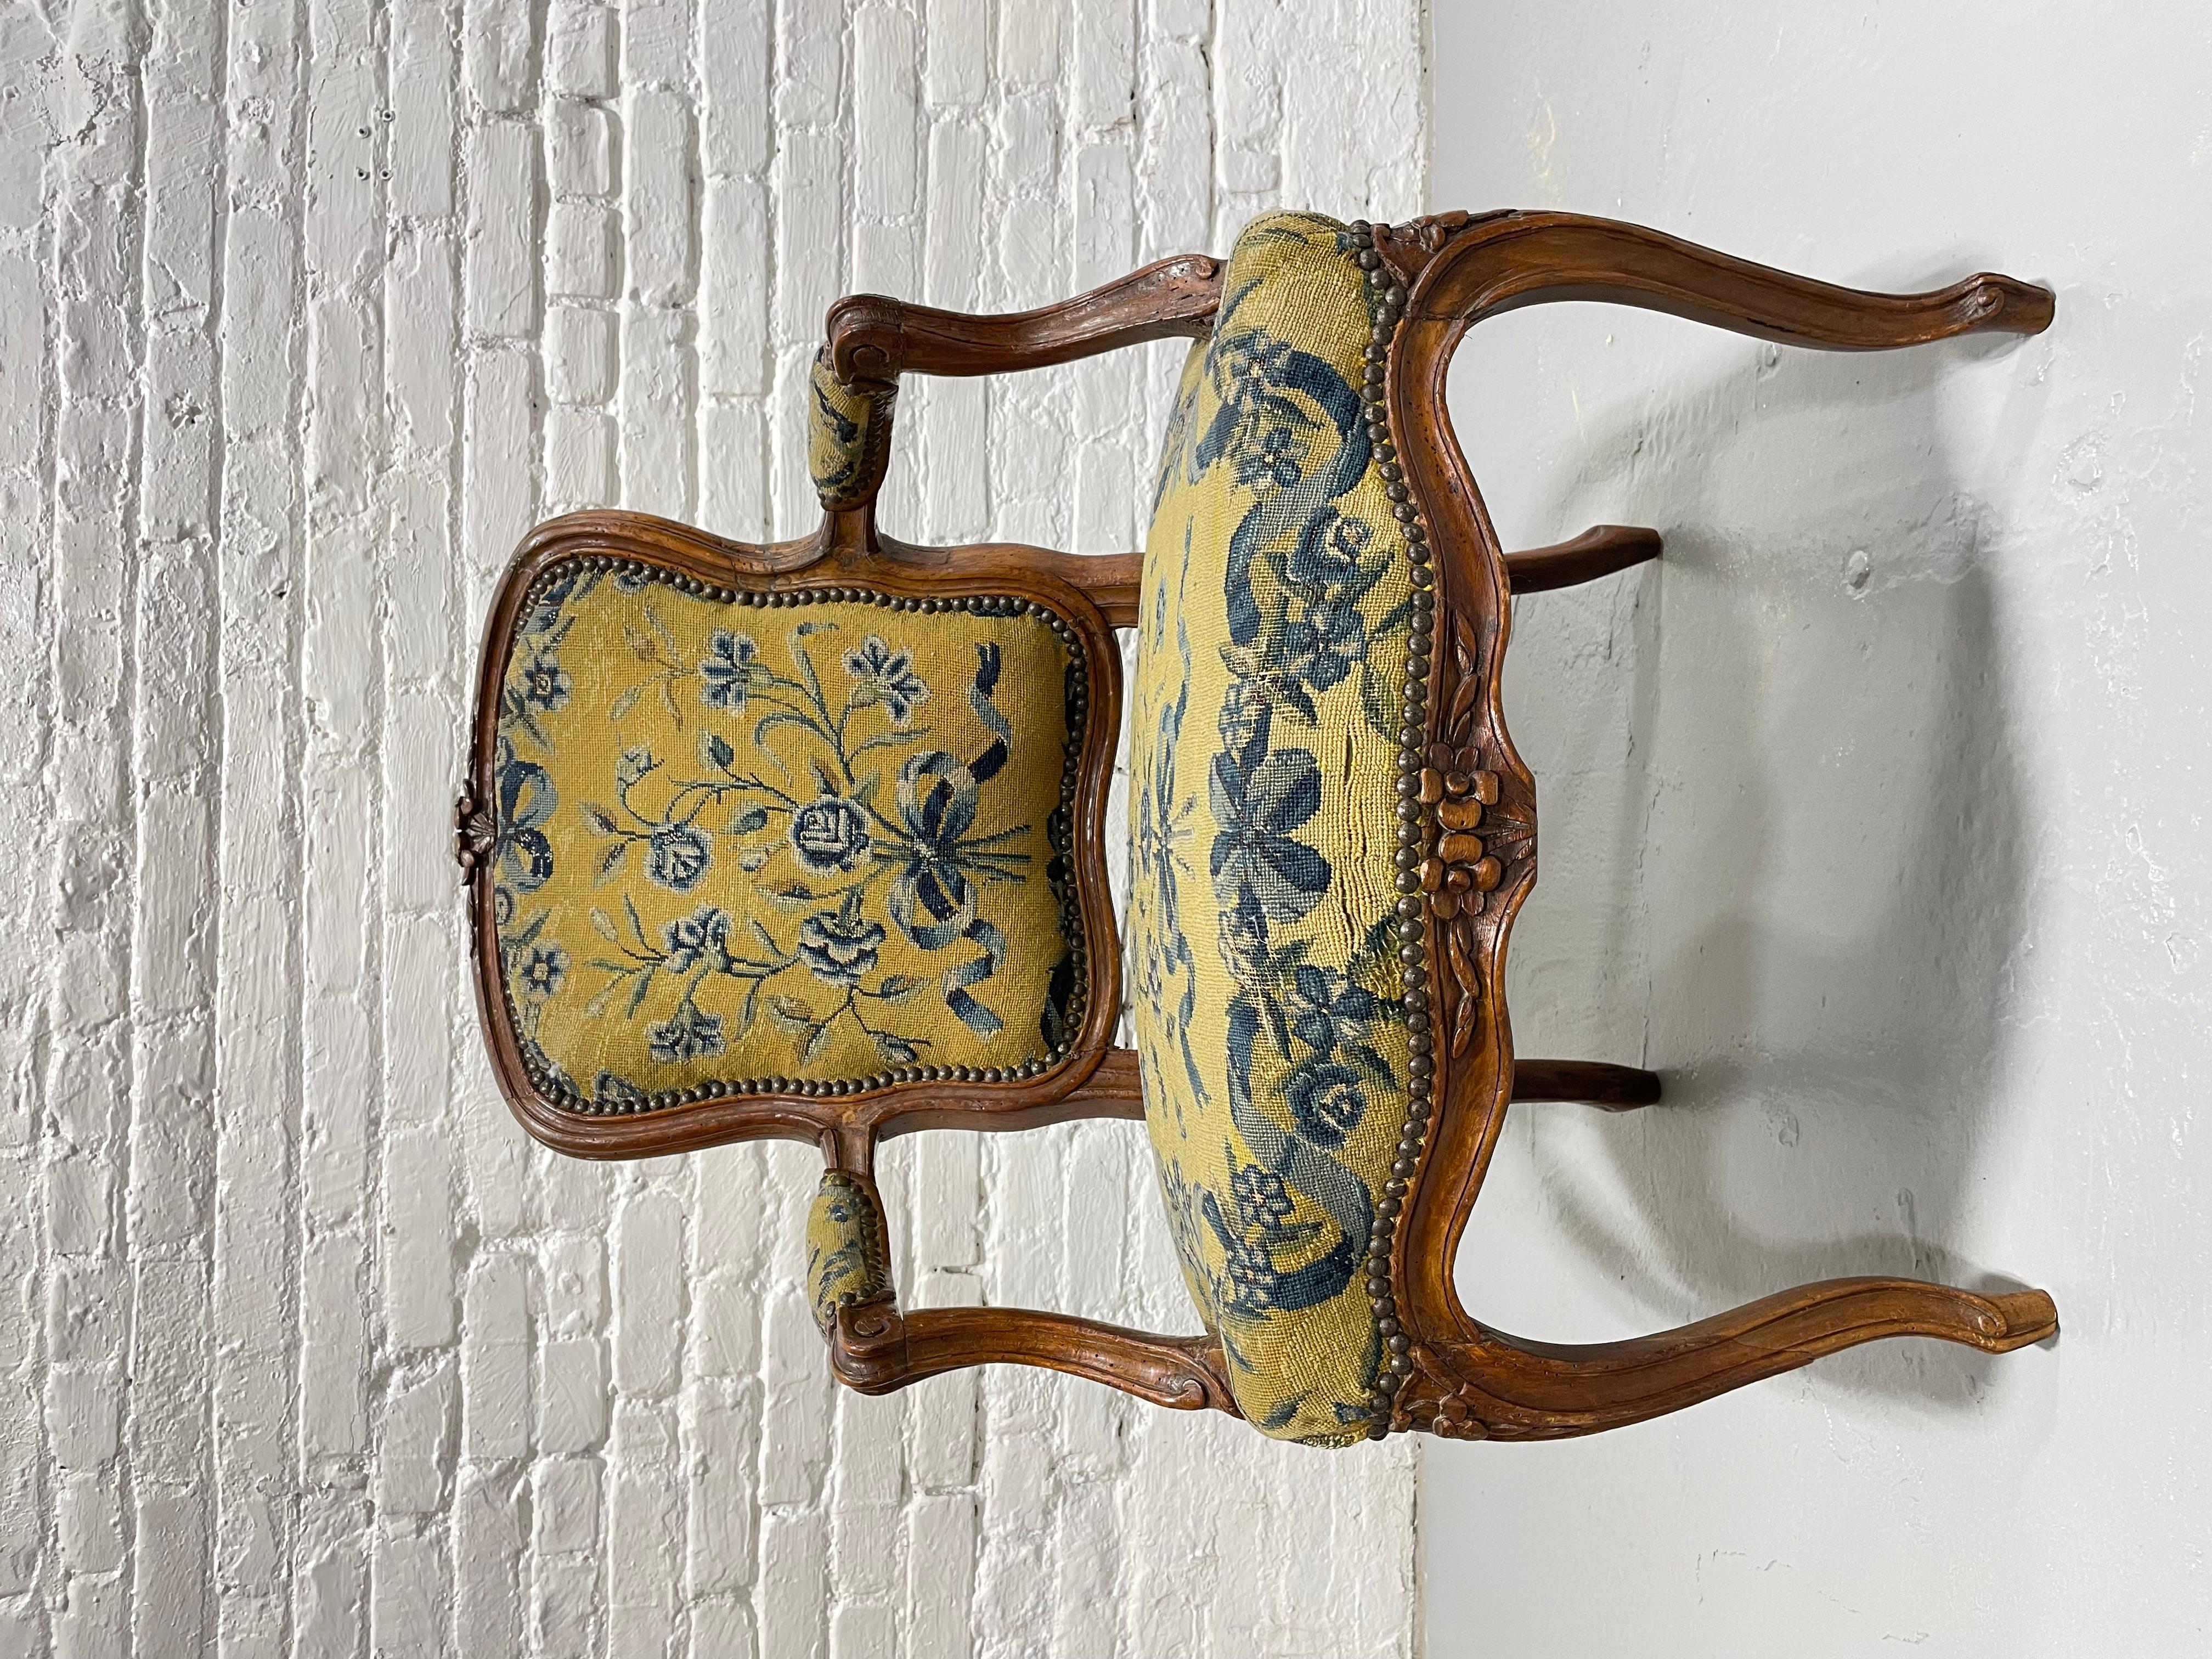 French Antique Walnut Louis XV Walnut Armchair featuring deep hand carved elegant flower and foliage designs. Made in France circa mid-1700’s. The upholstery is a lovely tapestry of yellow with blue floral patterned design. Nice antique condition